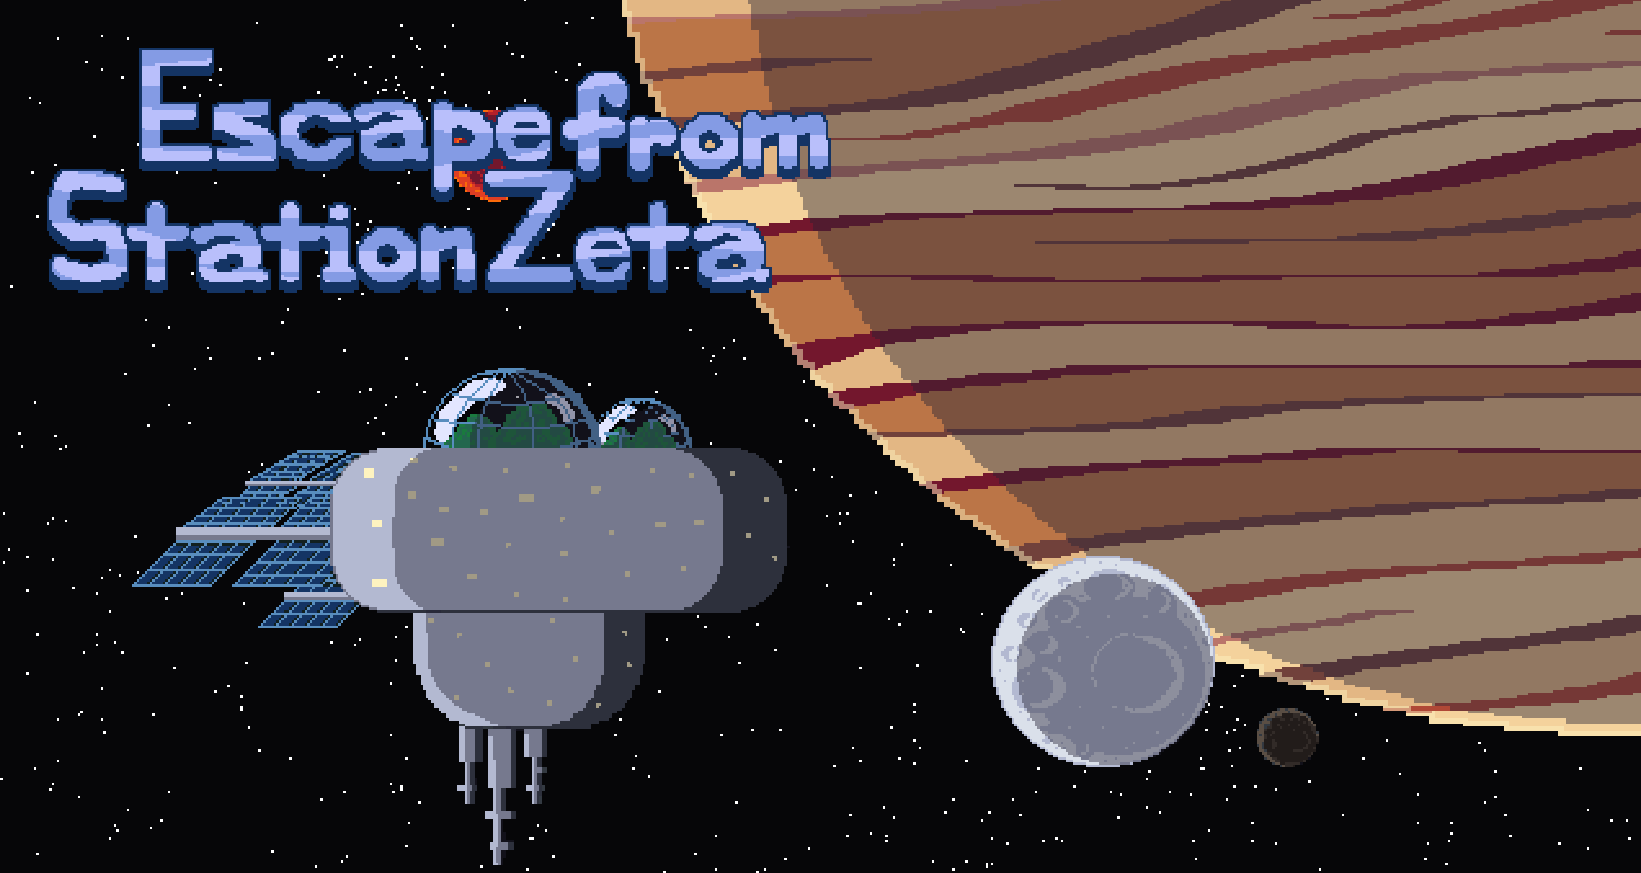 Escape from Station Zeta